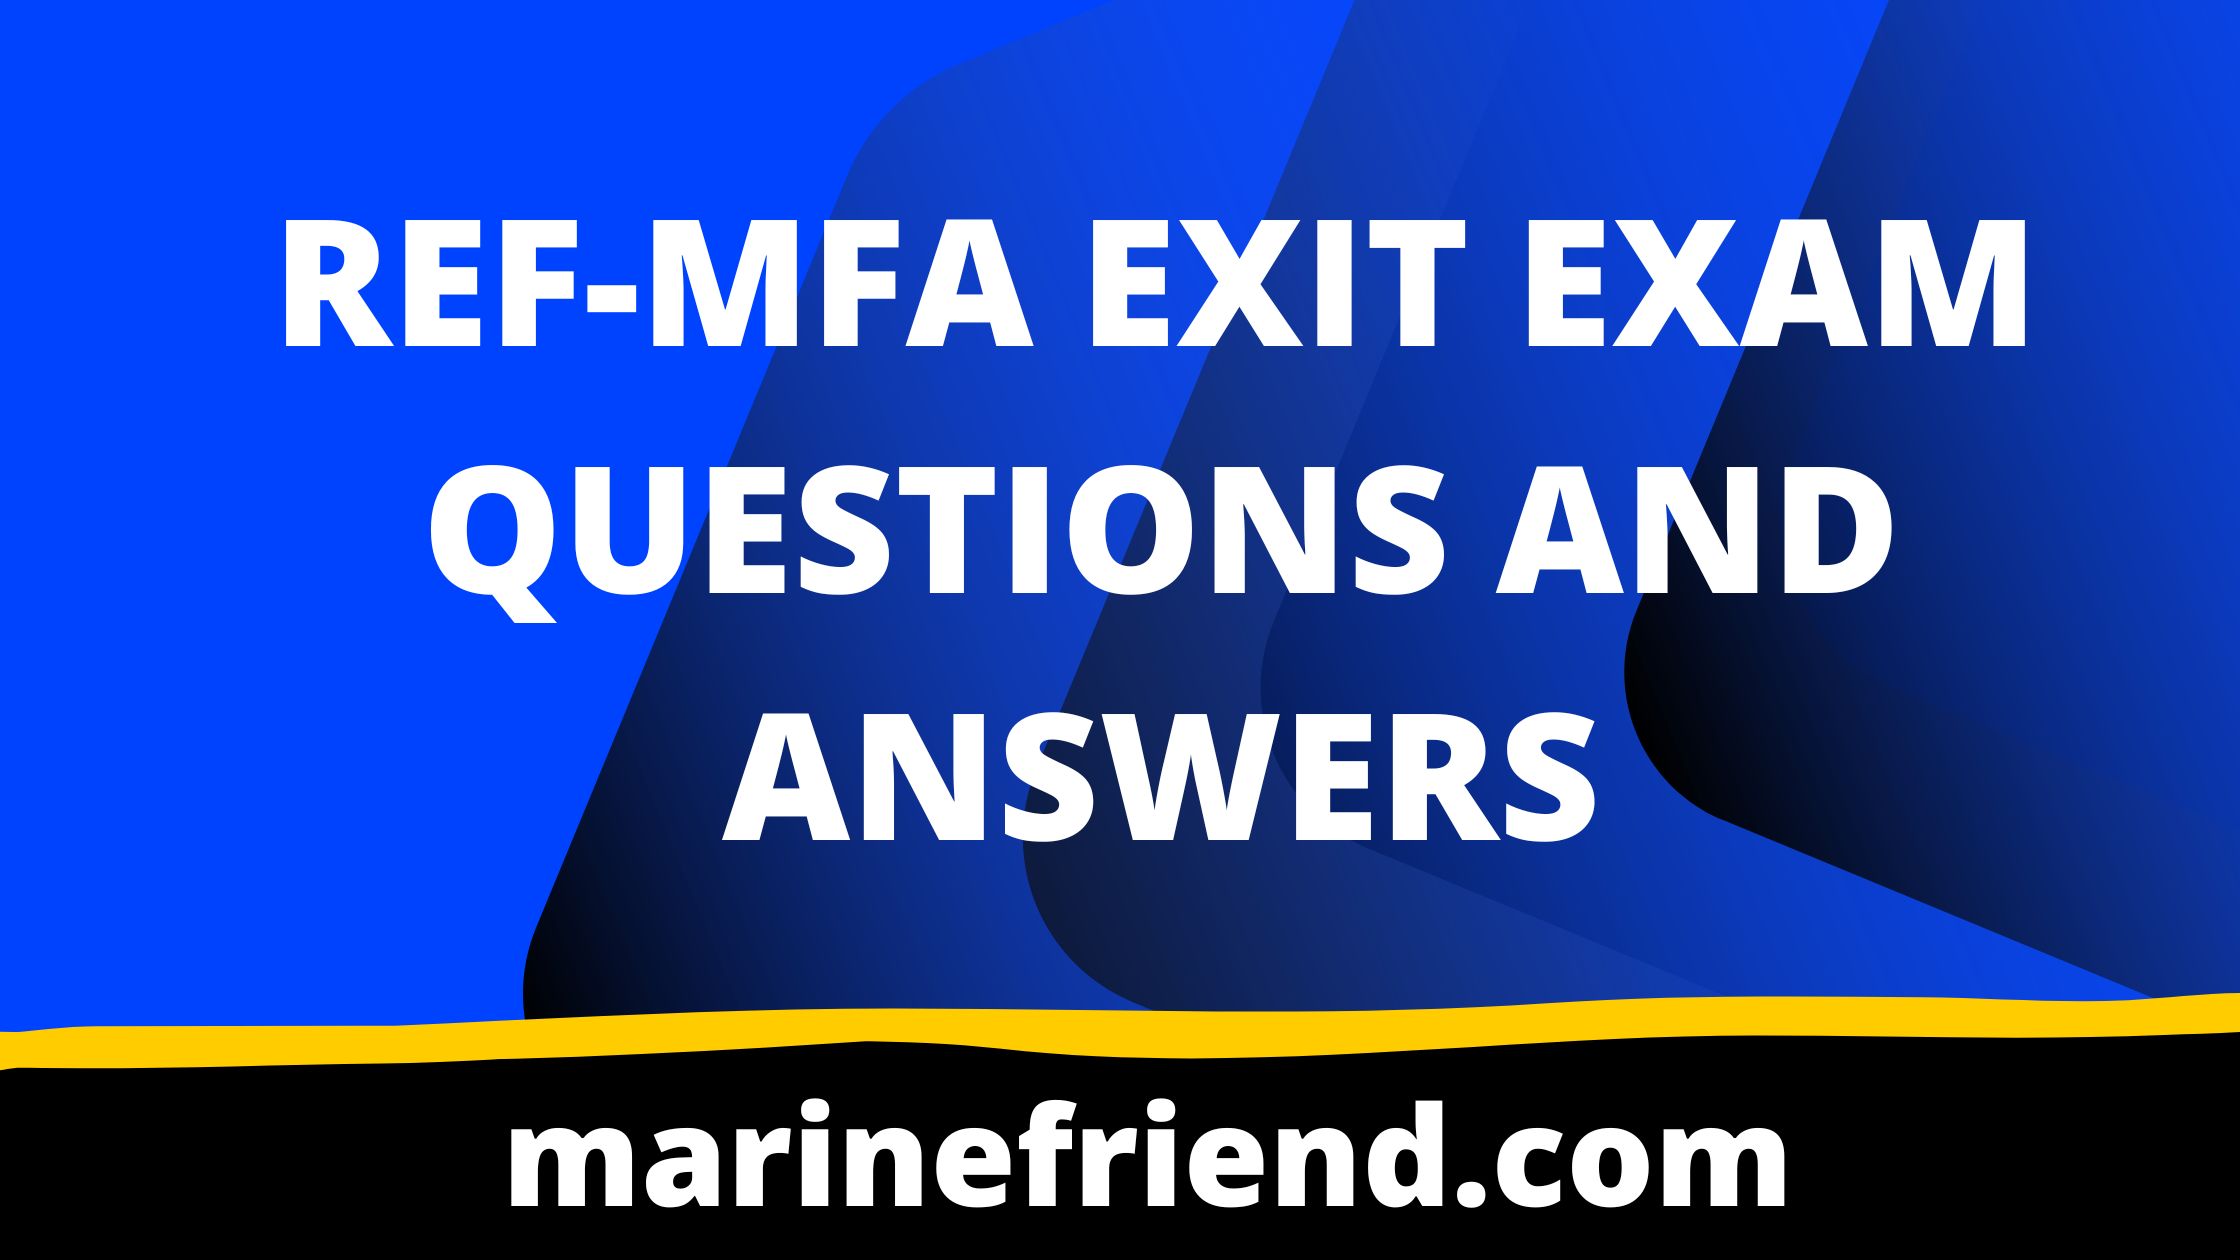 REF MFA EXIT EXAM QUESTIONS AND ANSWERS